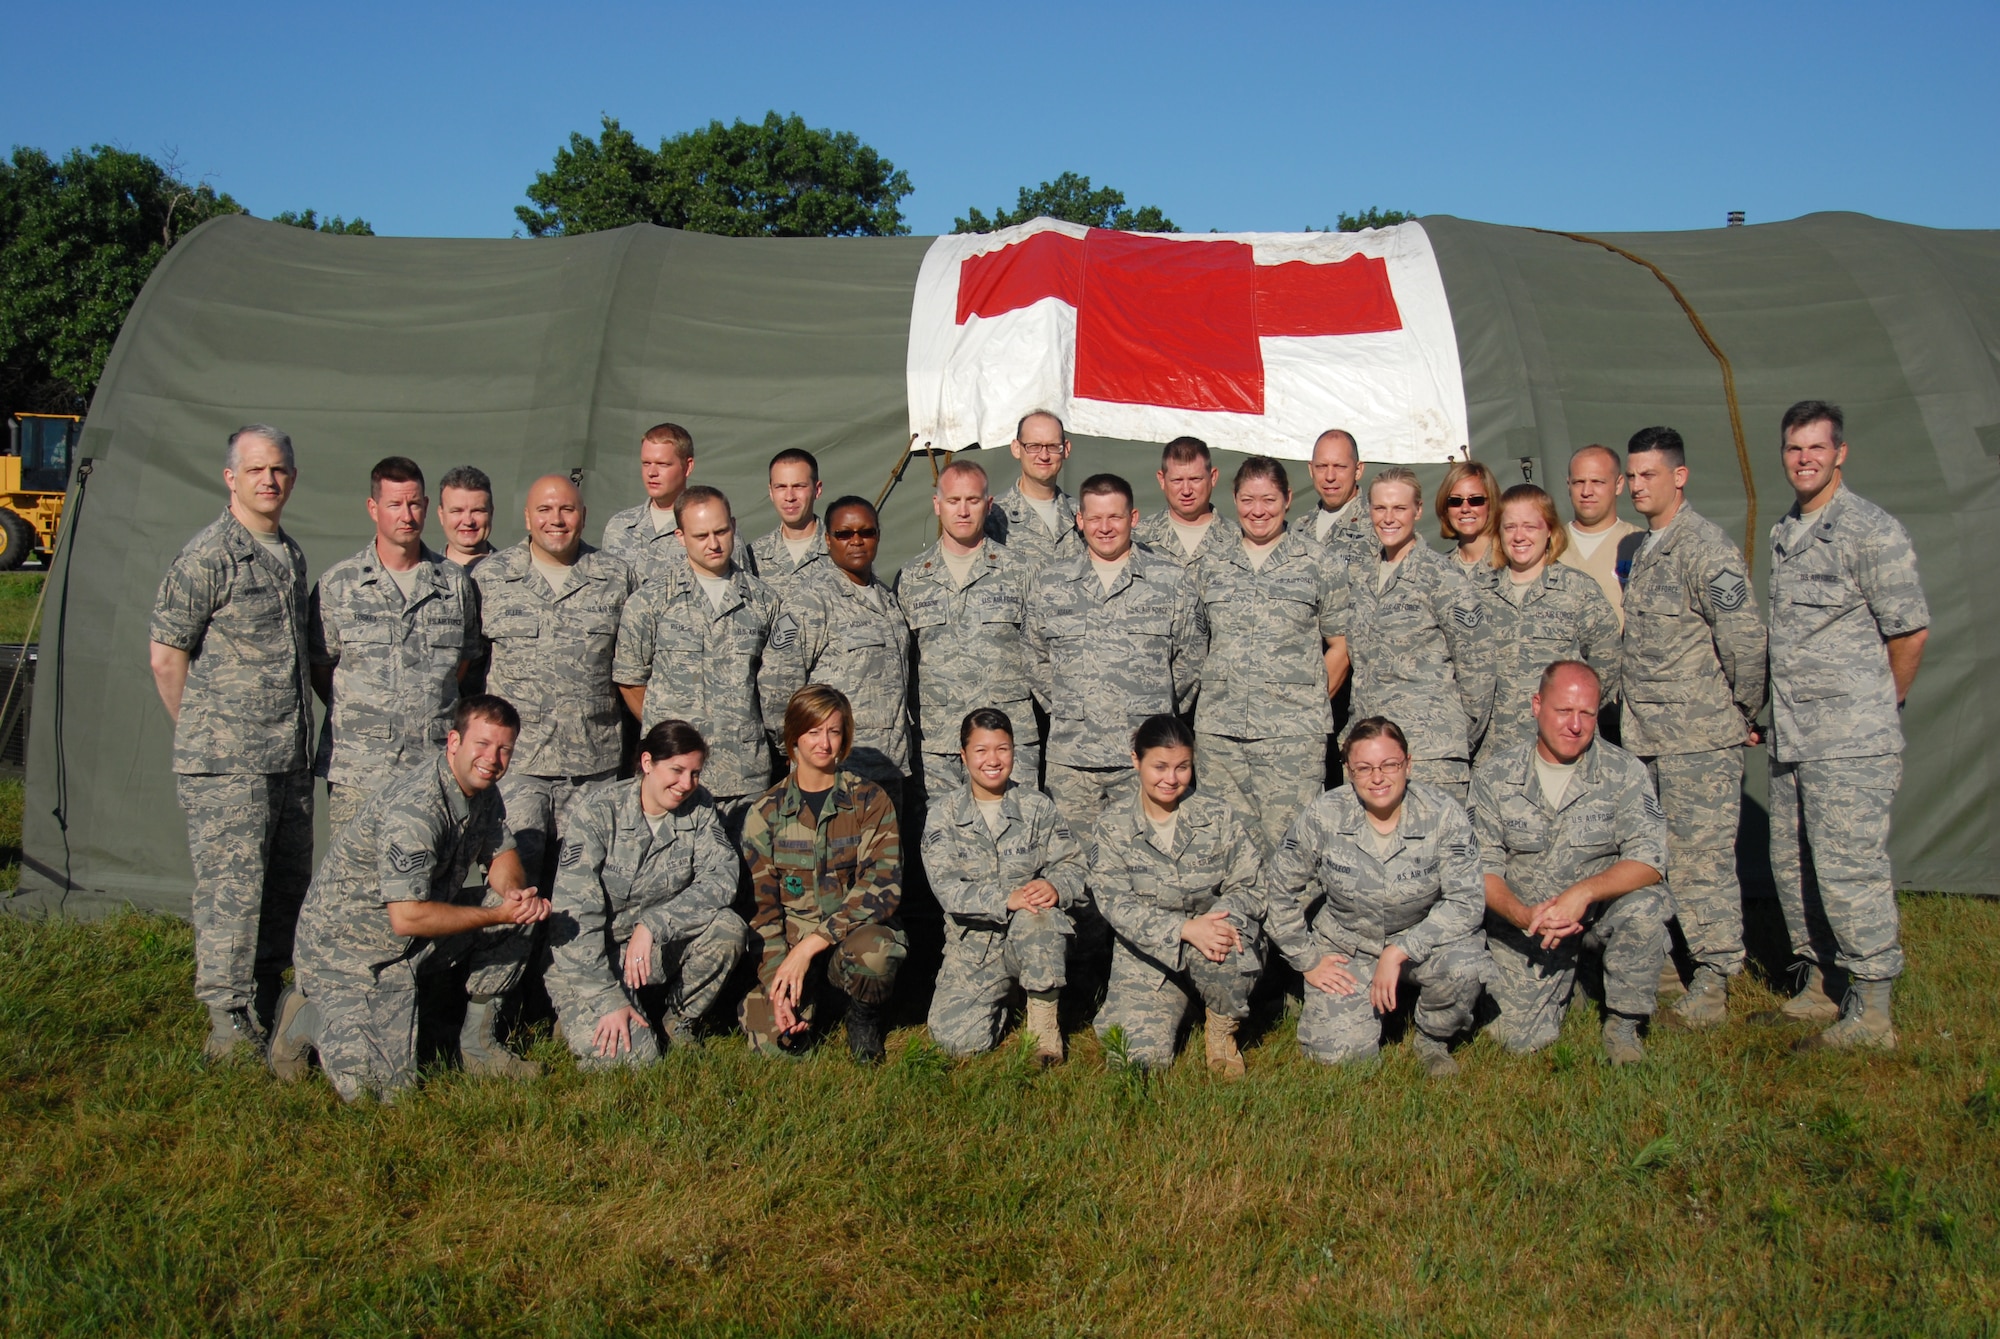 Members of the 178th Medical Group, Springfield, Ohio, participate in the domestic operations portion of the 2011 Patriot Exercise July 13 at Volk Field Combat Readiness Training Center, Wis.  During the exercise, the 178 MDG is providing support for an Expeditionary Medical Support Basic, which is designed to facilitate surgical and primary medical care in a deployed environment. (U.S. Air Force photo by Senior Airman Amy N. Adducchio/Released)